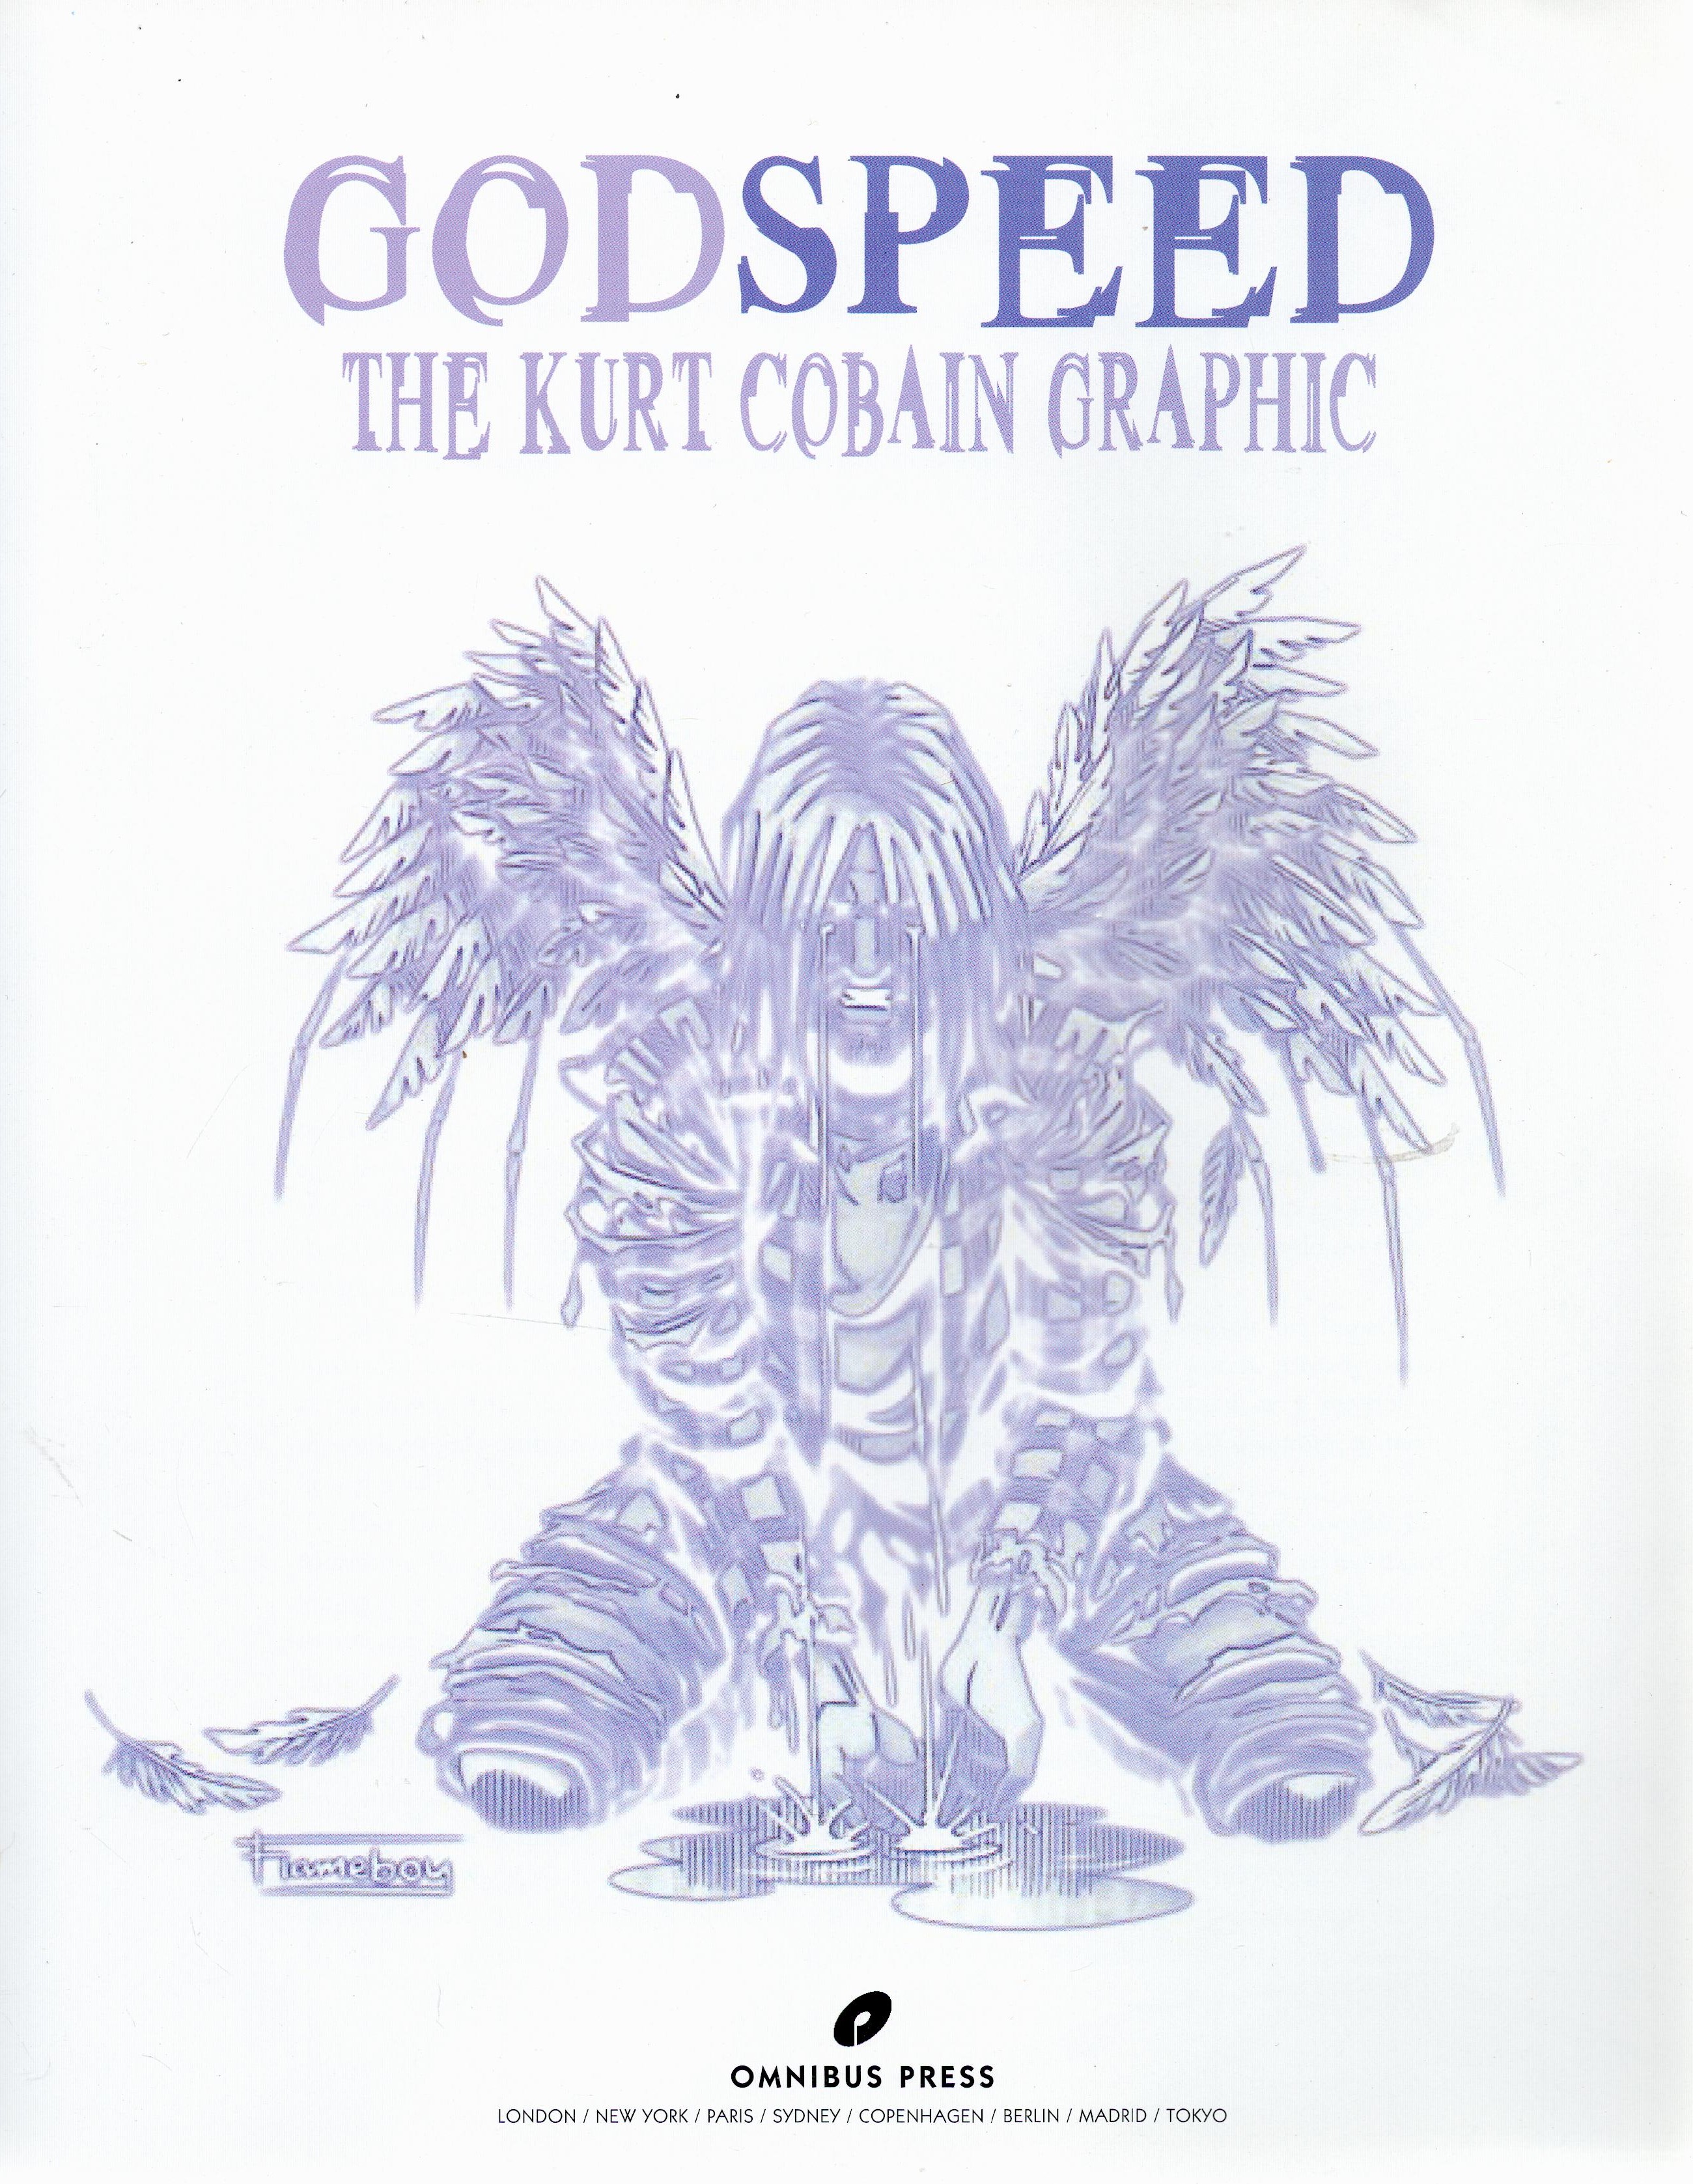 Godspeed The Kurt Cobain Graphic Softback Book 2003 First Edition published by Omnibus Press some - Image 2 of 3